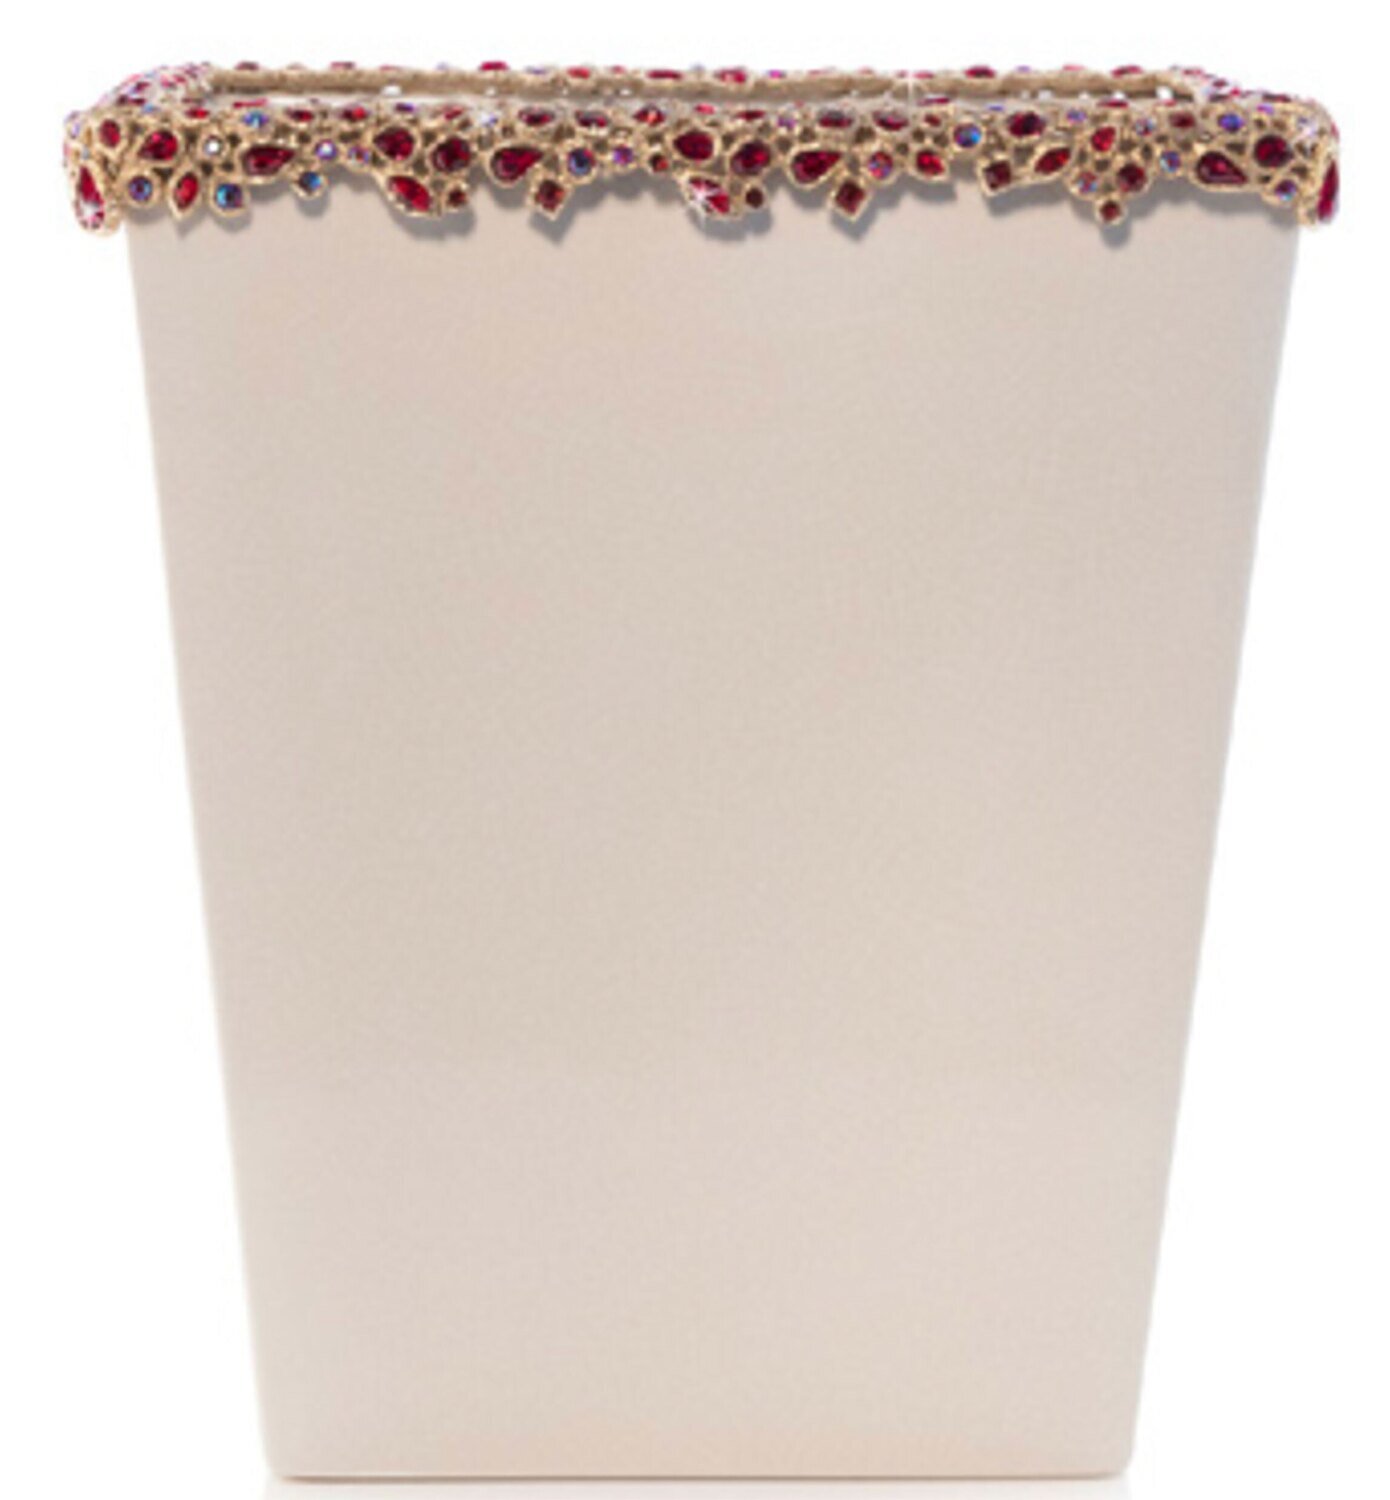 Jay Strongwater Esther Bejeweled Trash Bin Ruby SDH8890-224